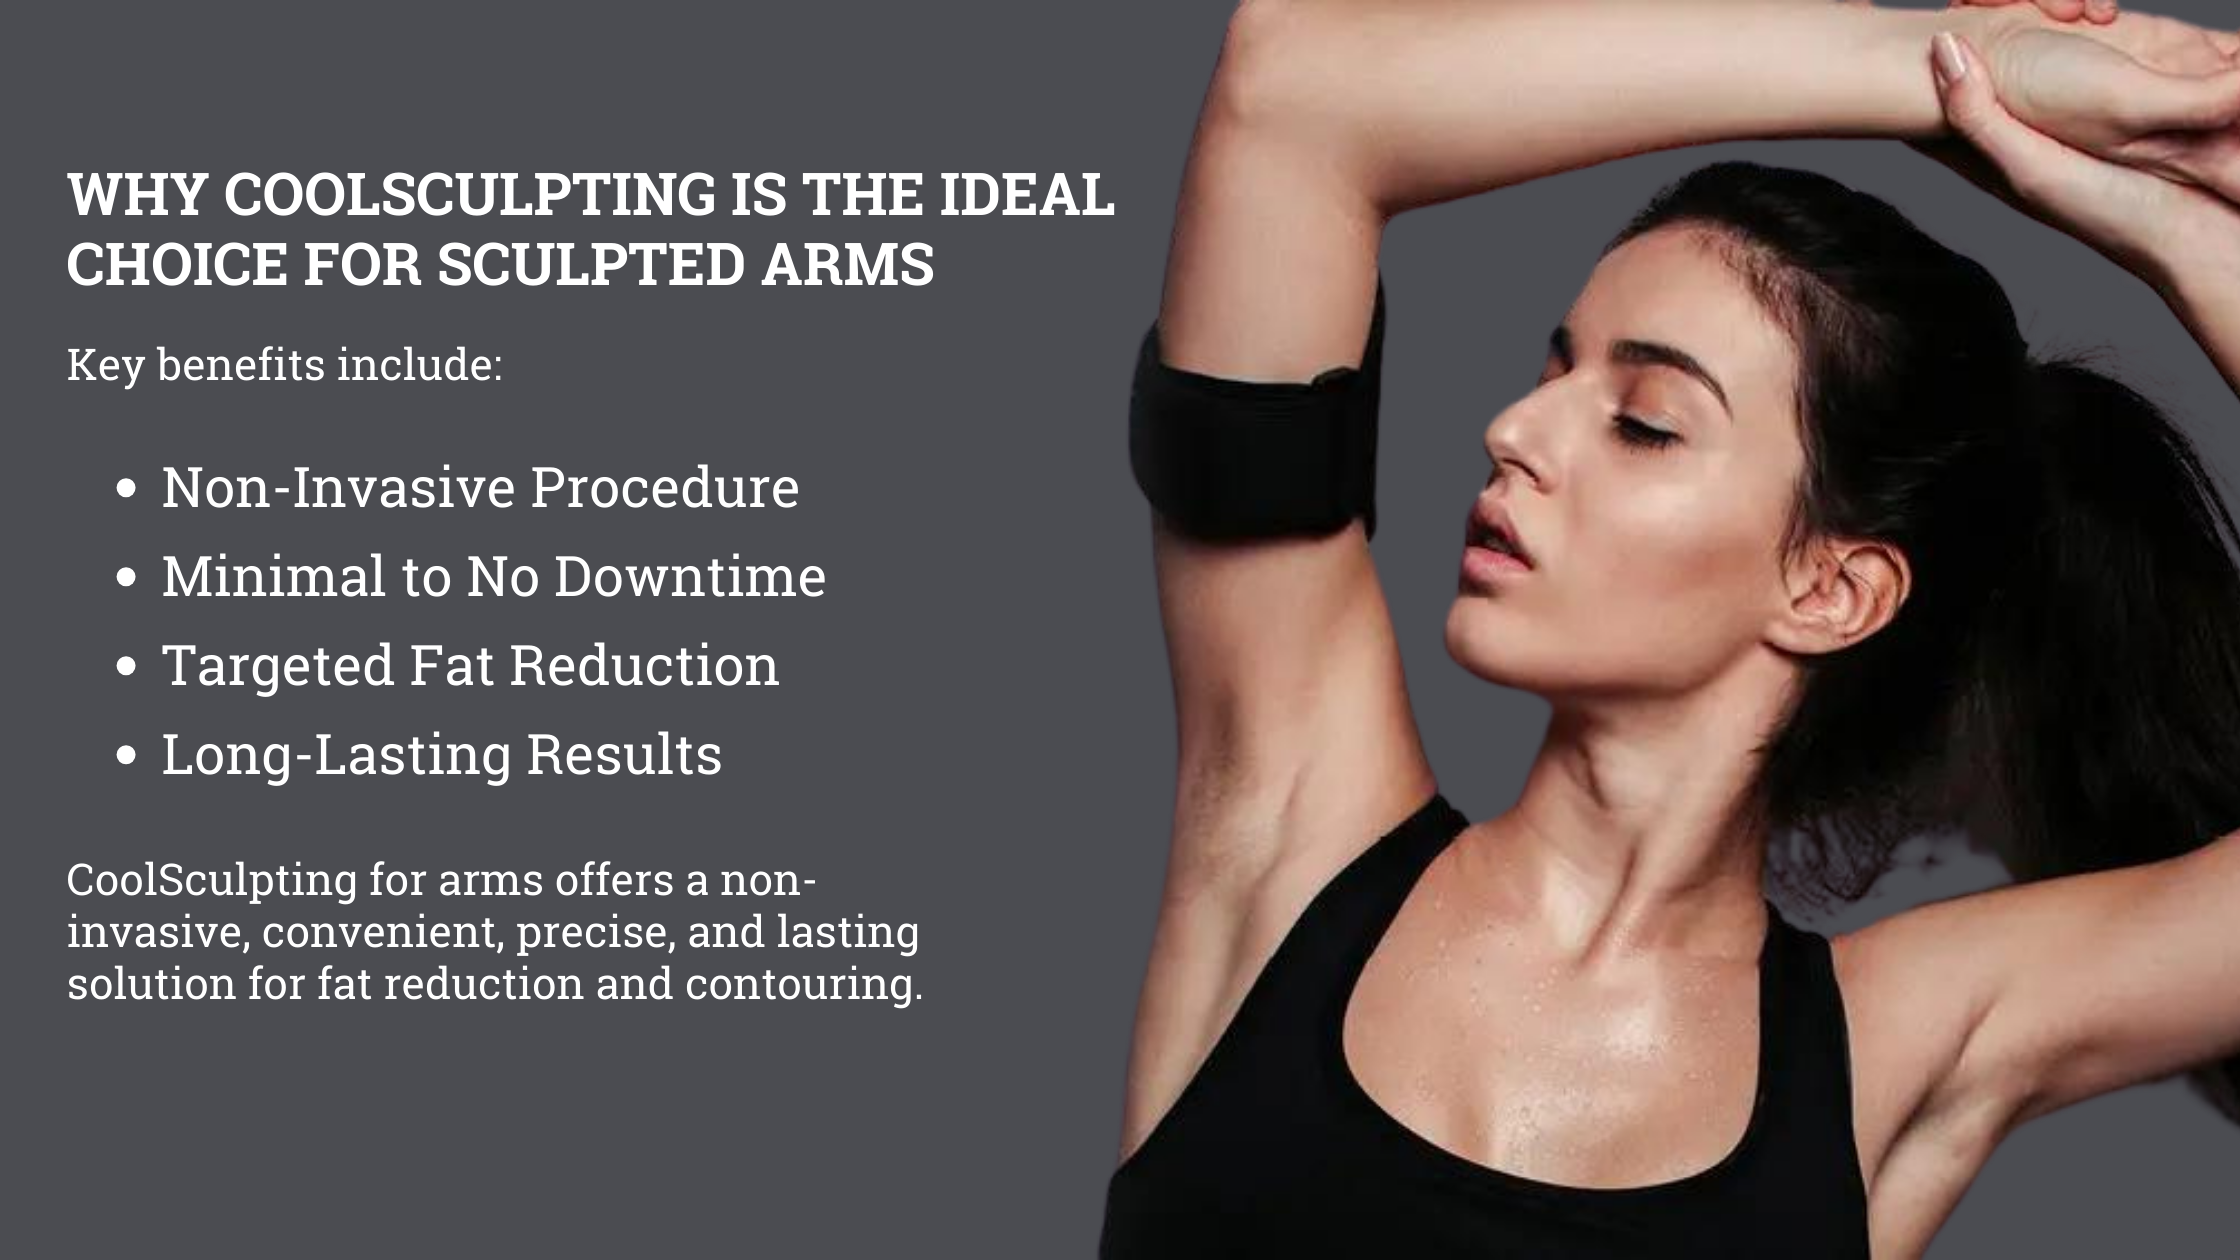 CoolSculpting for toned arms